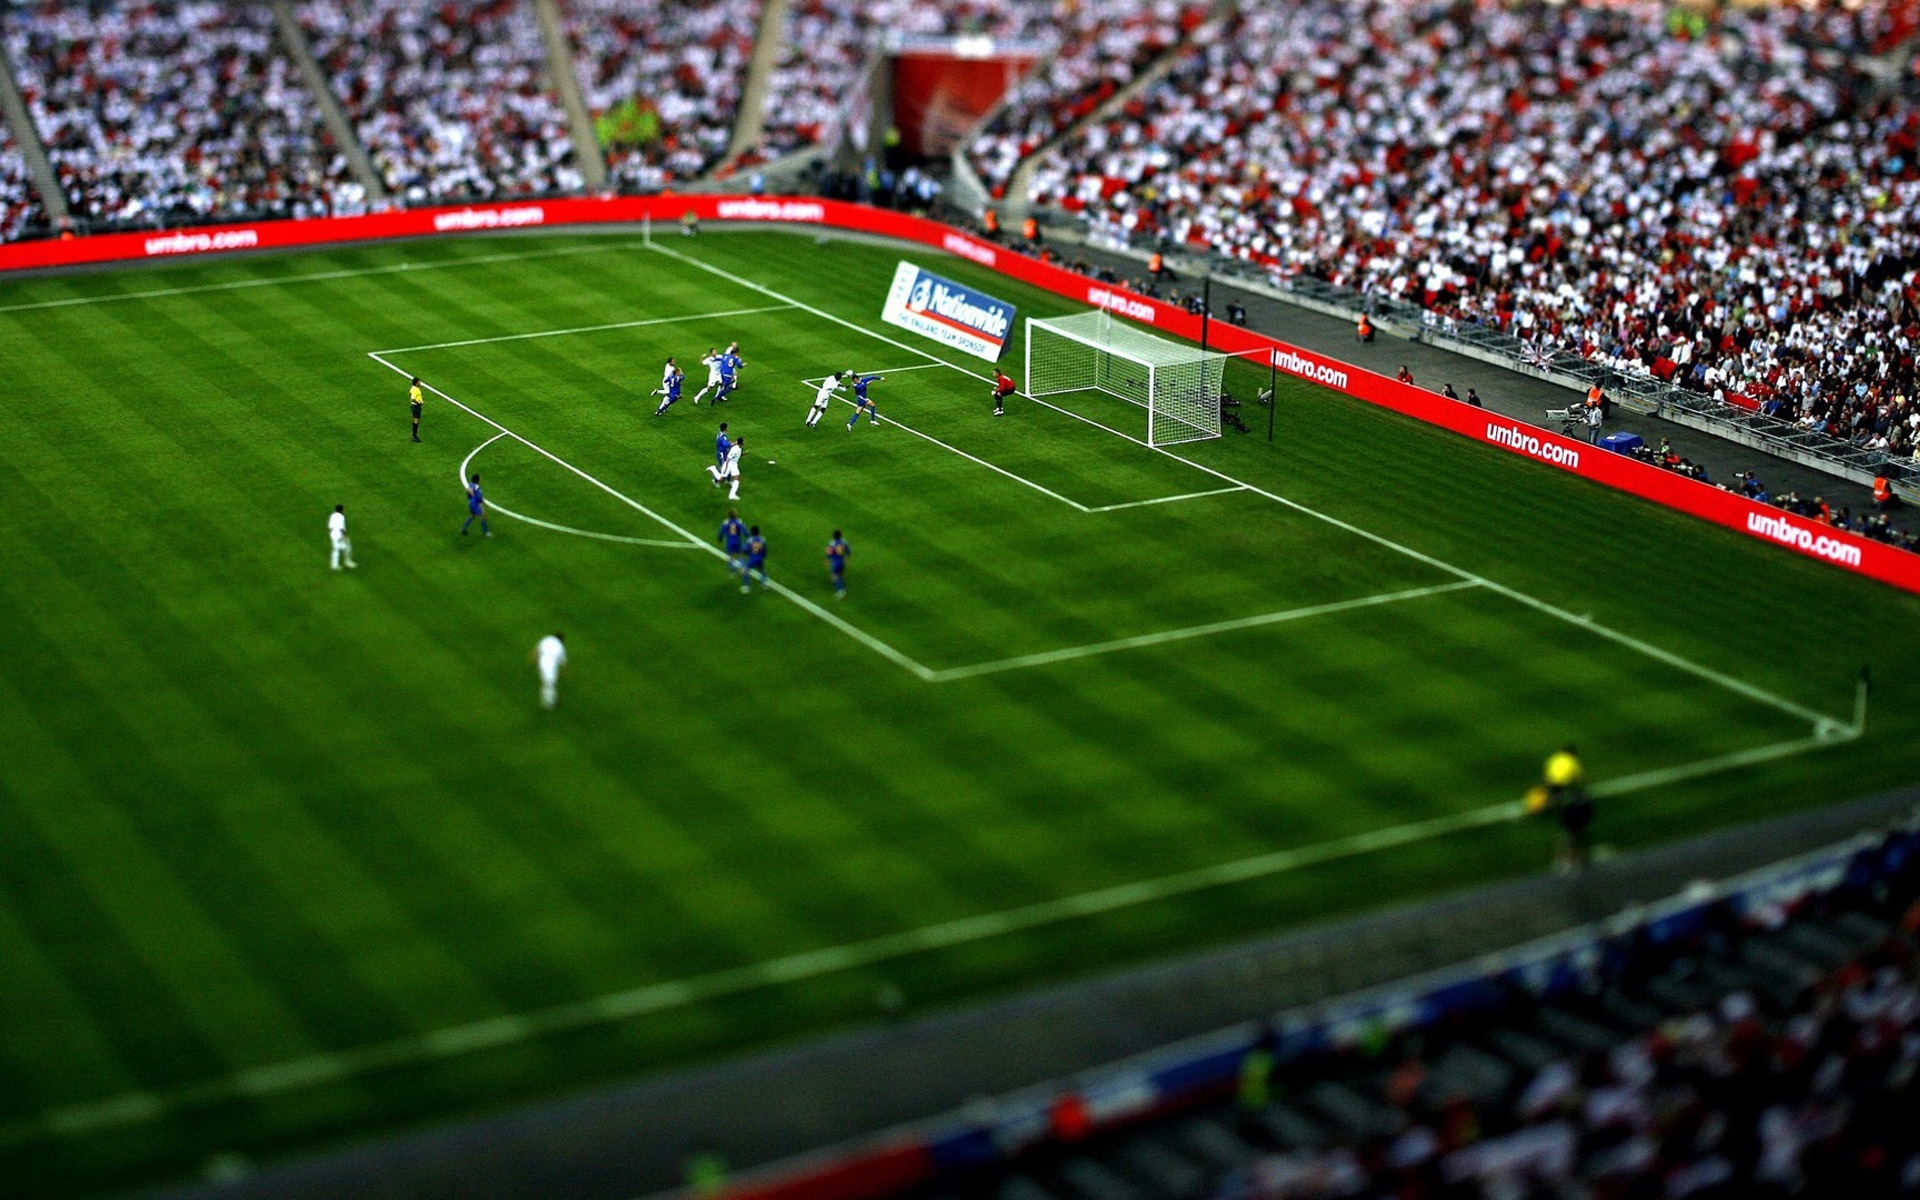 Stadium Toy Effect for 1920 x 1200 widescreen resolution